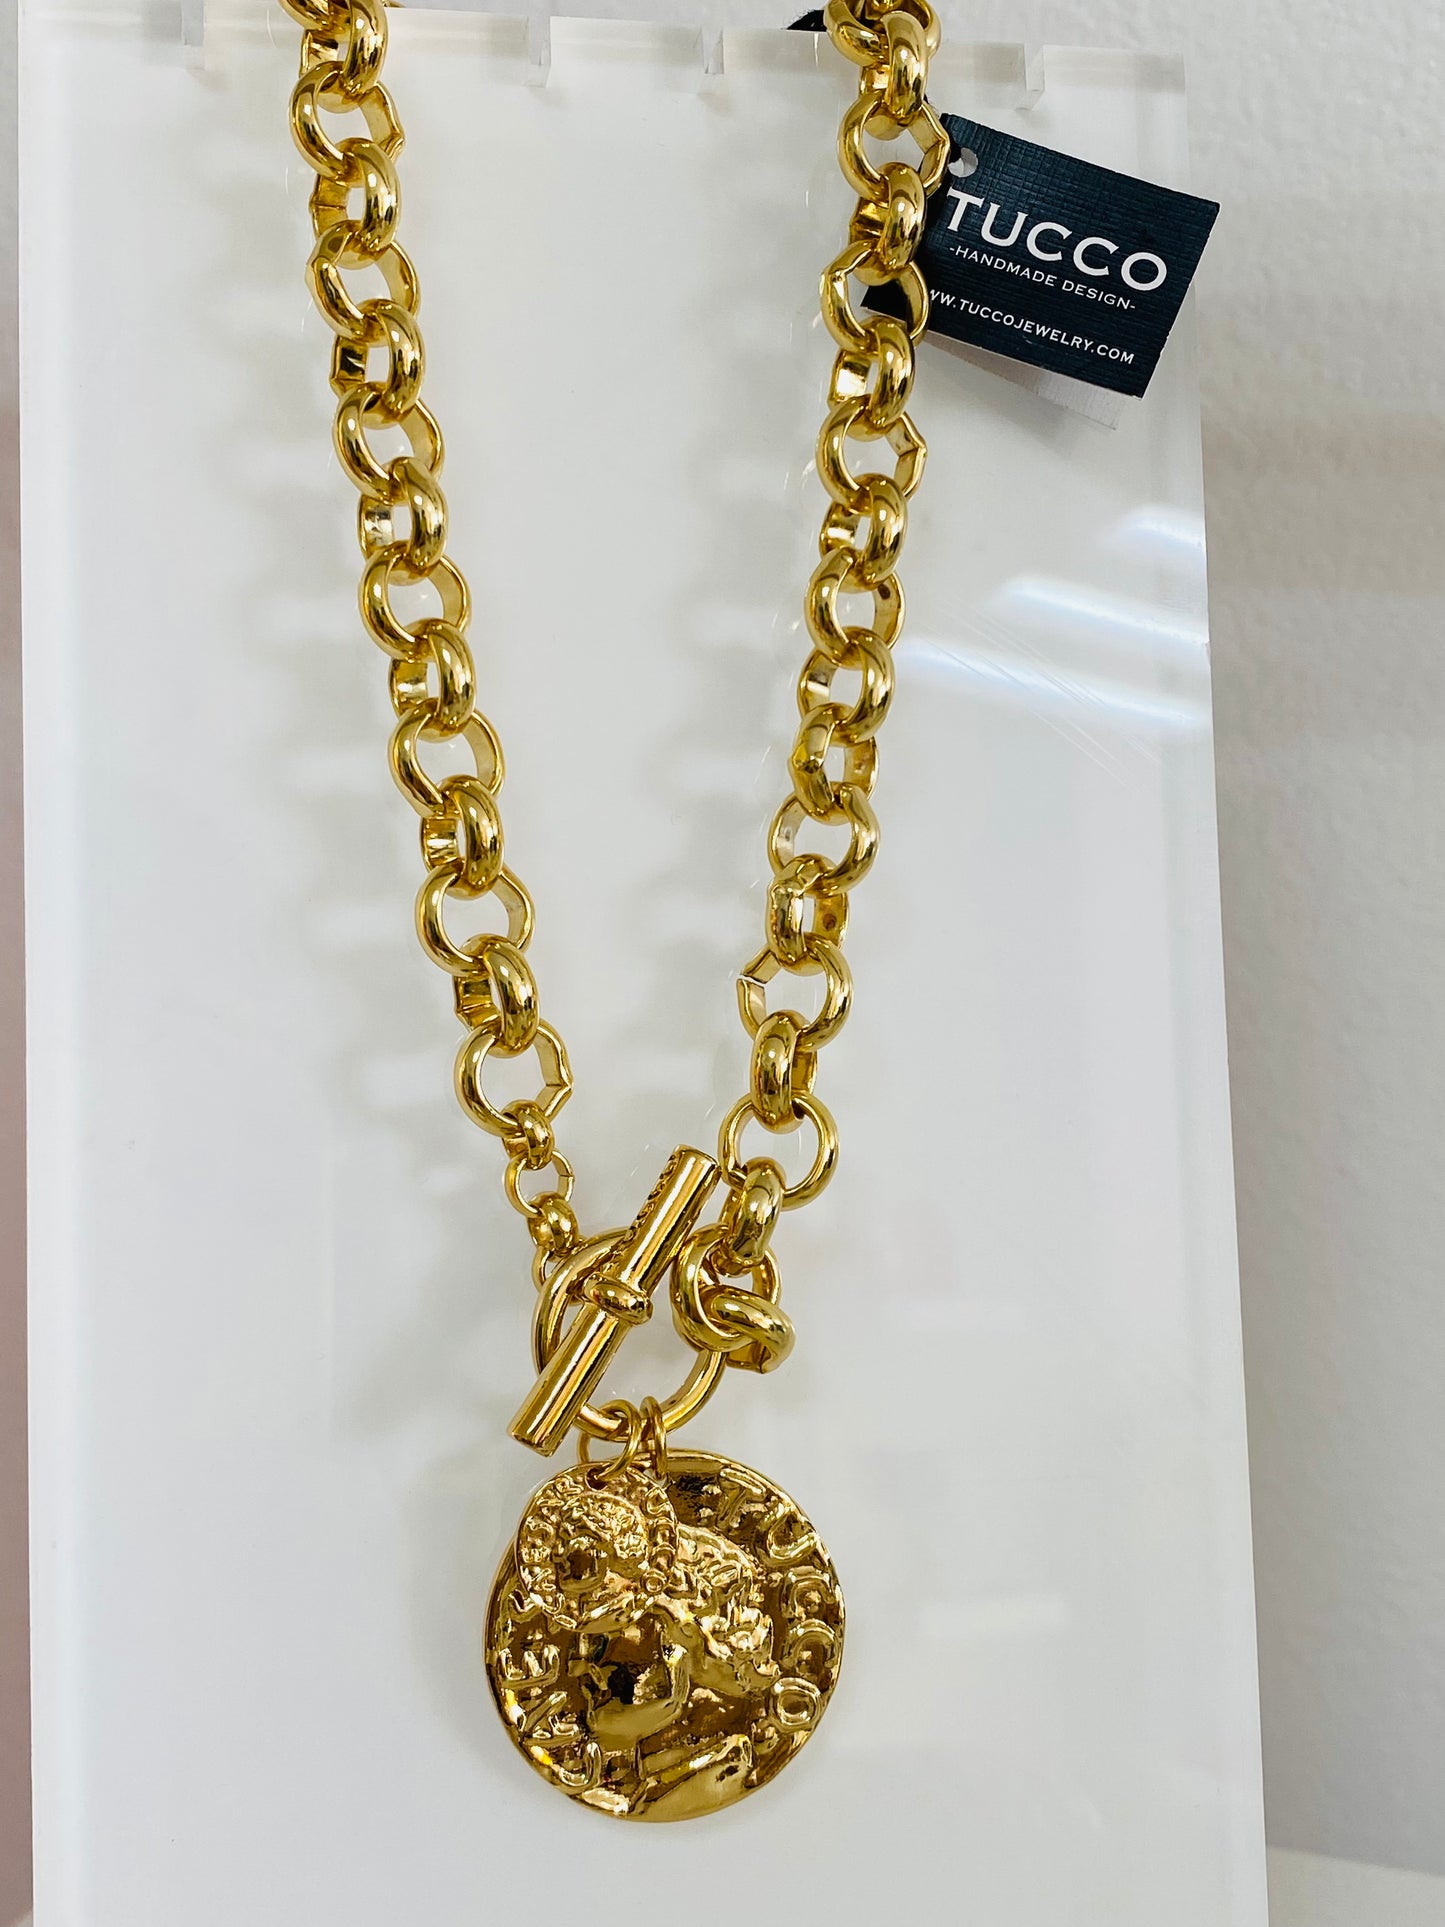 Tucco Gold Plated Coin Necklace